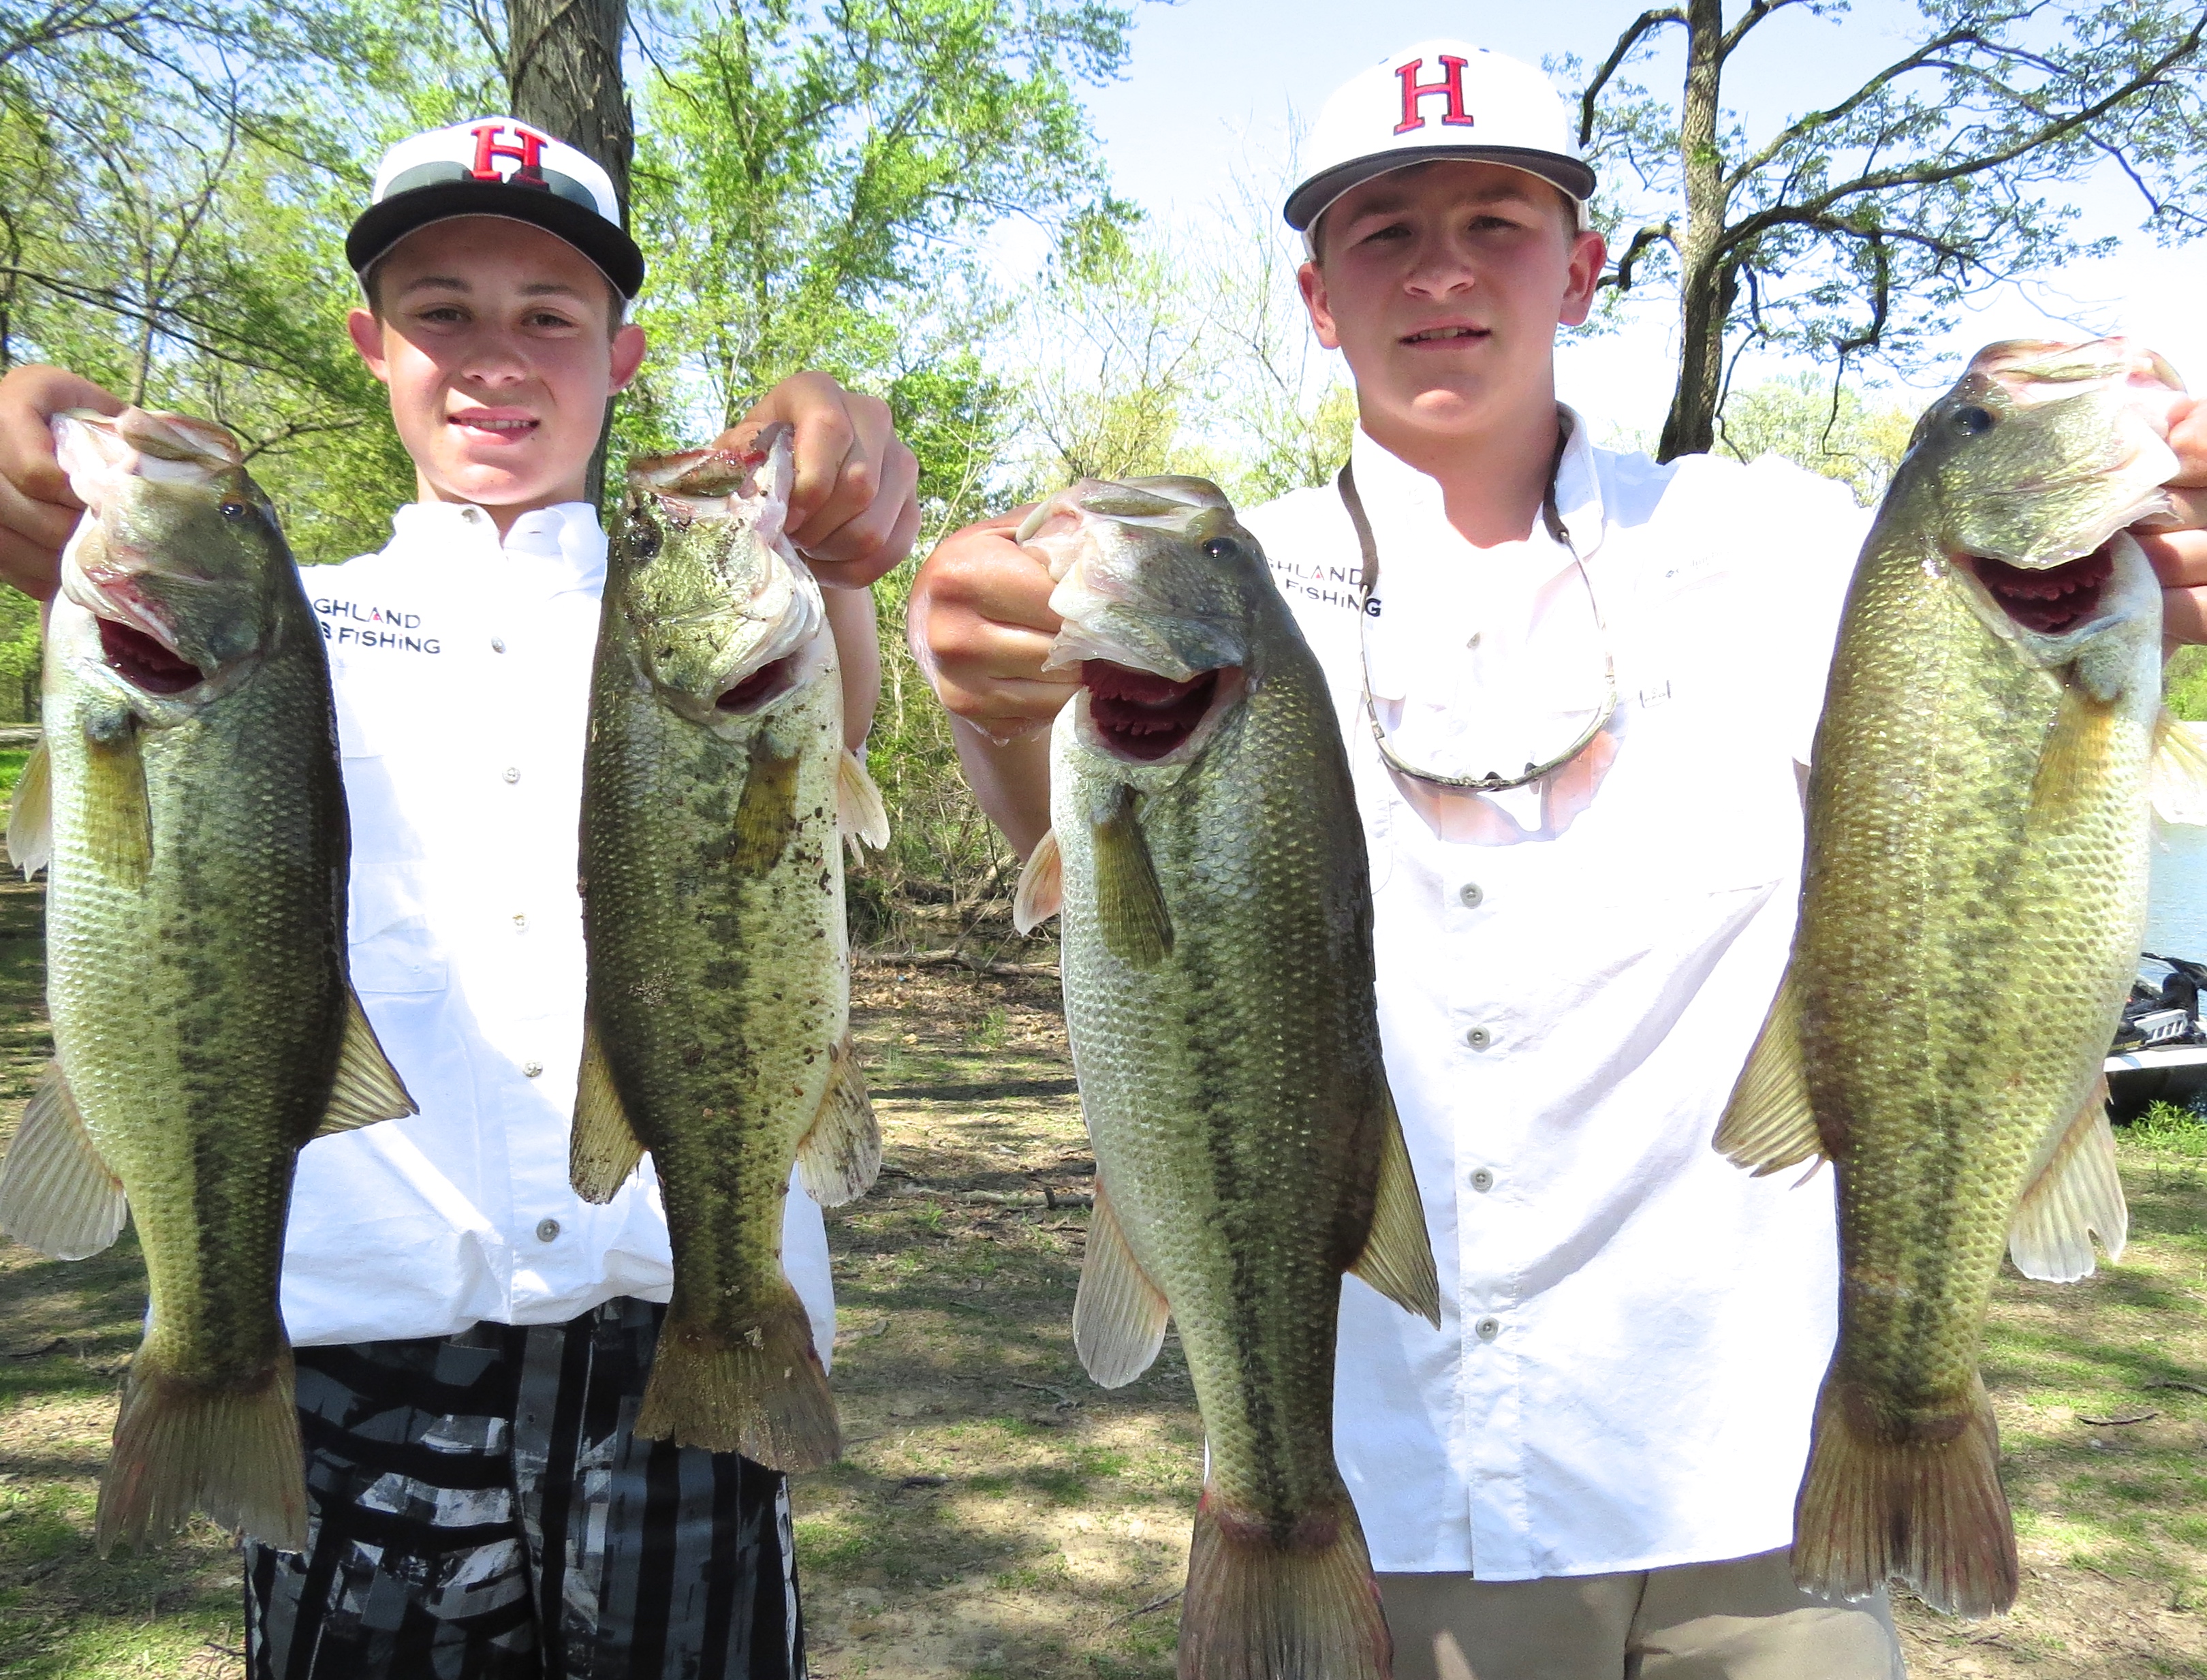 Bass fishing is a big part of life in southern Illinois. Now, students—such as these young fishermen from Highland High School—pursue their hobby as a team sport, which has also been introduced in other states, such as Kentucky. 